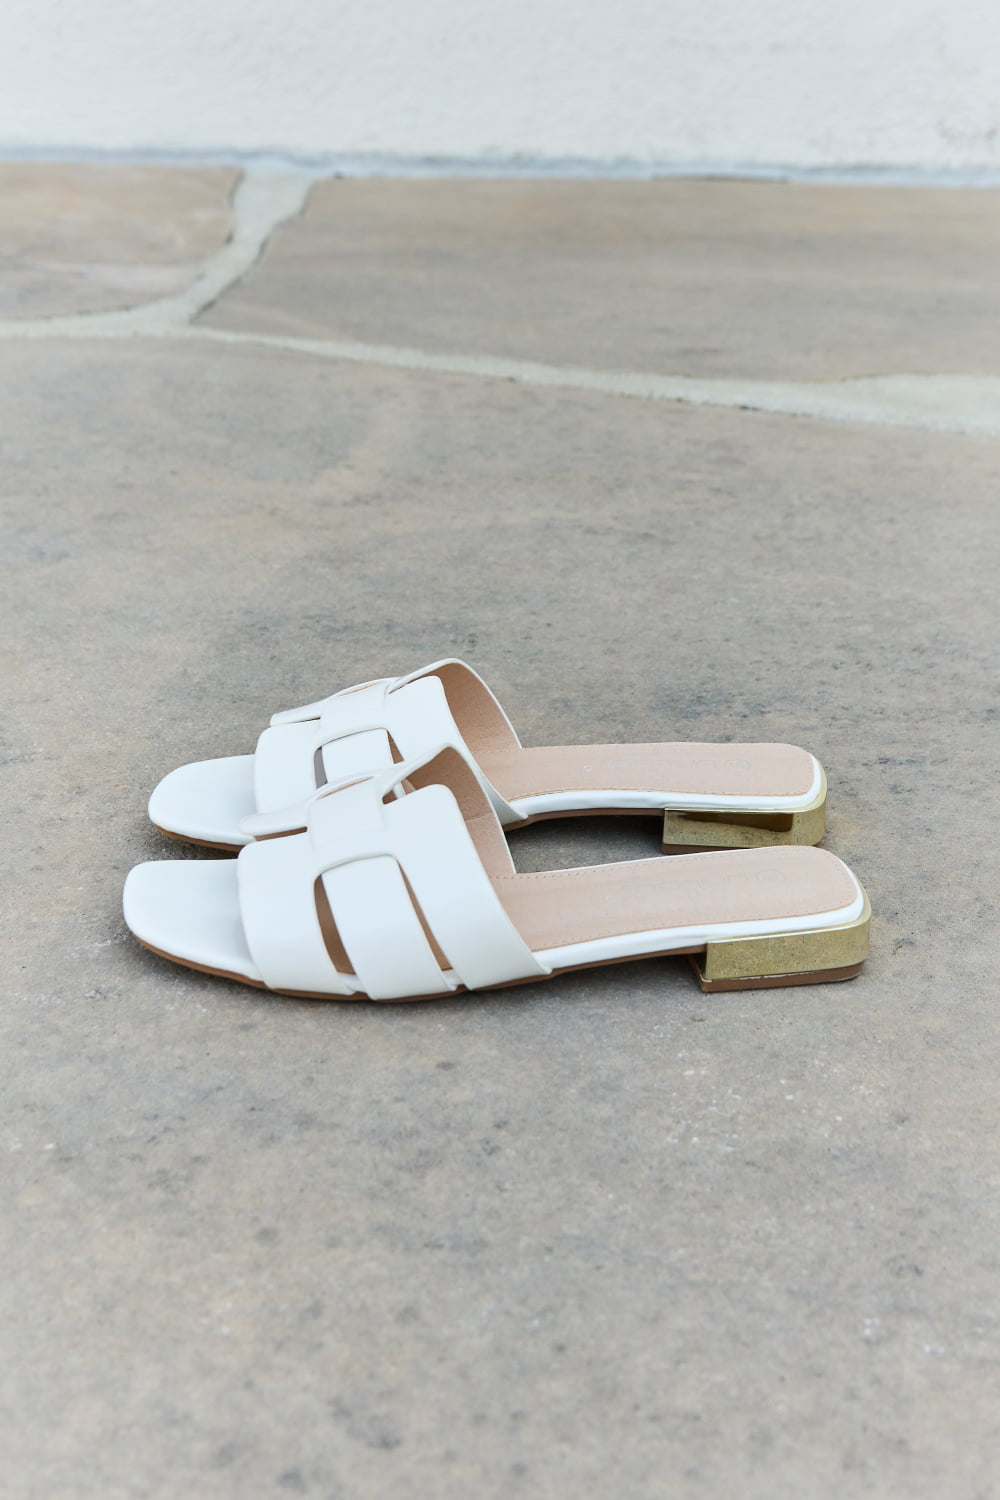 Weeboo Walk It Out Slide Sandals in Cream - nailedmoms